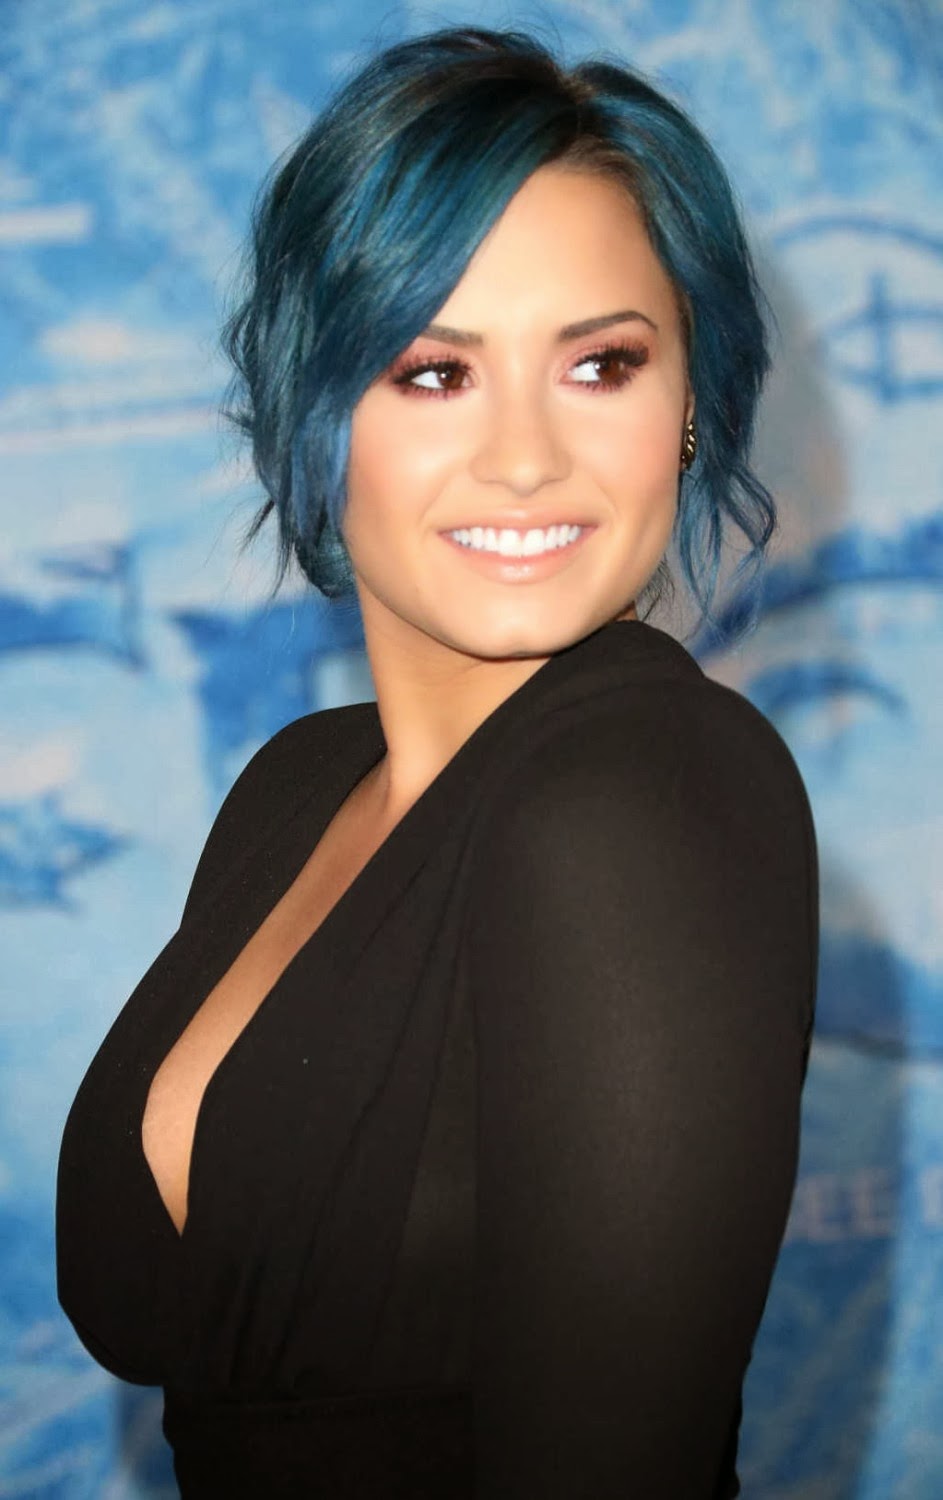 Demi Lovato Flashing Braless Boobs At Frozen Premiere In Hollywood Celebrities Nude